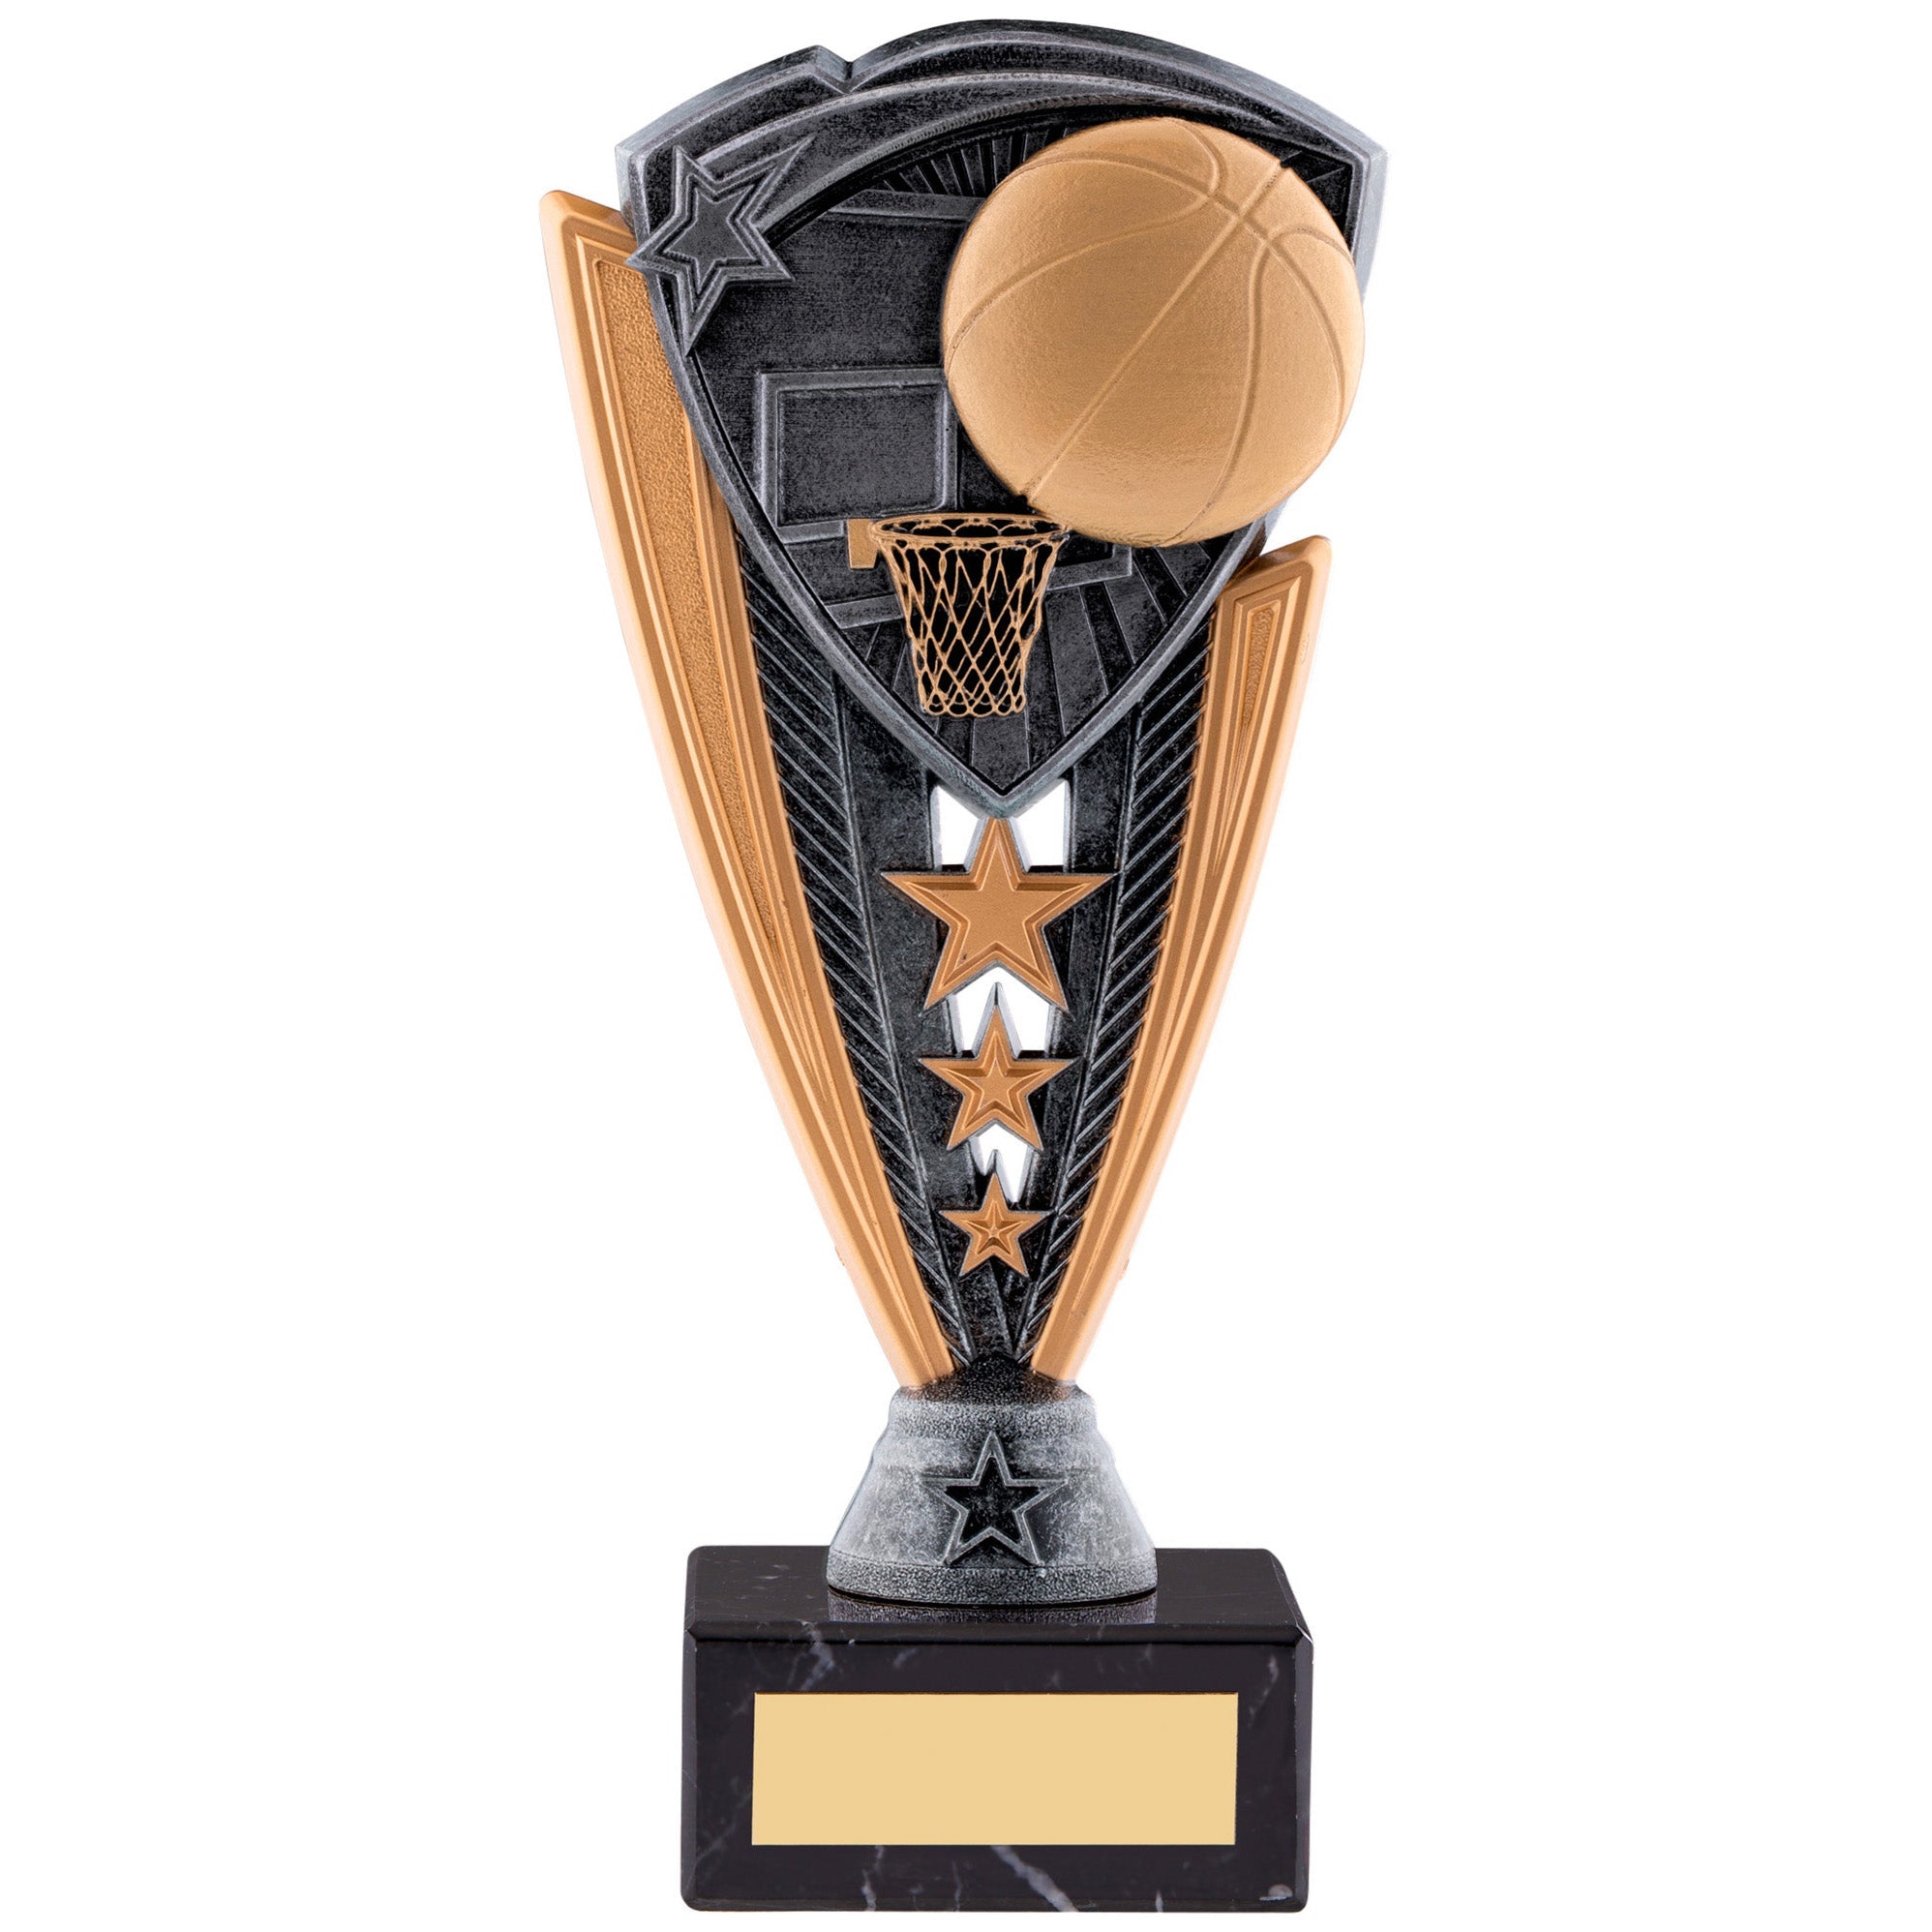 Basketball Utopia Award with Engraved Plaque on Marble Base